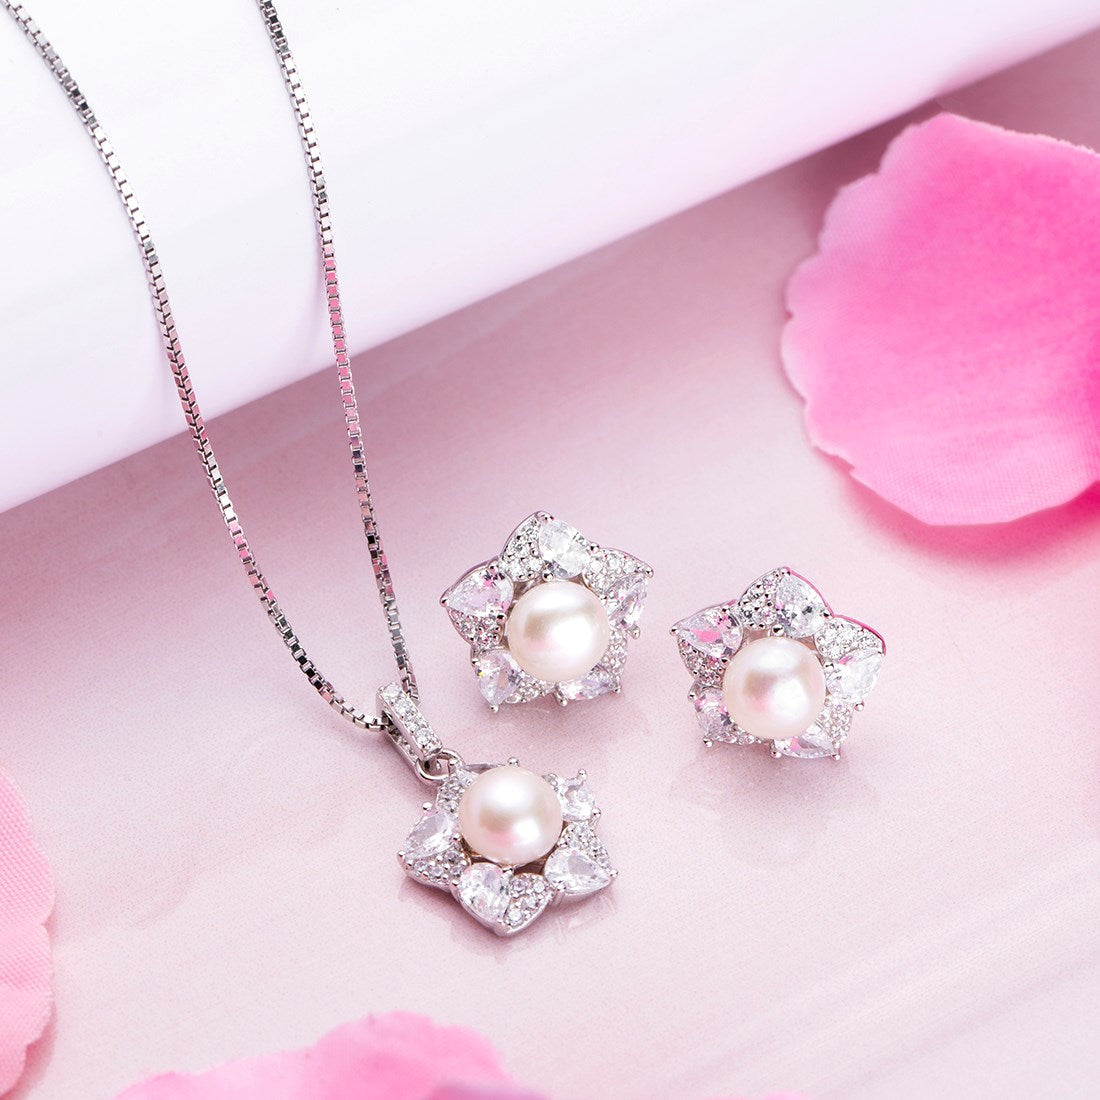 Floral Radiance Rhodium Plated 925 Sterling Silver Jewelry Set